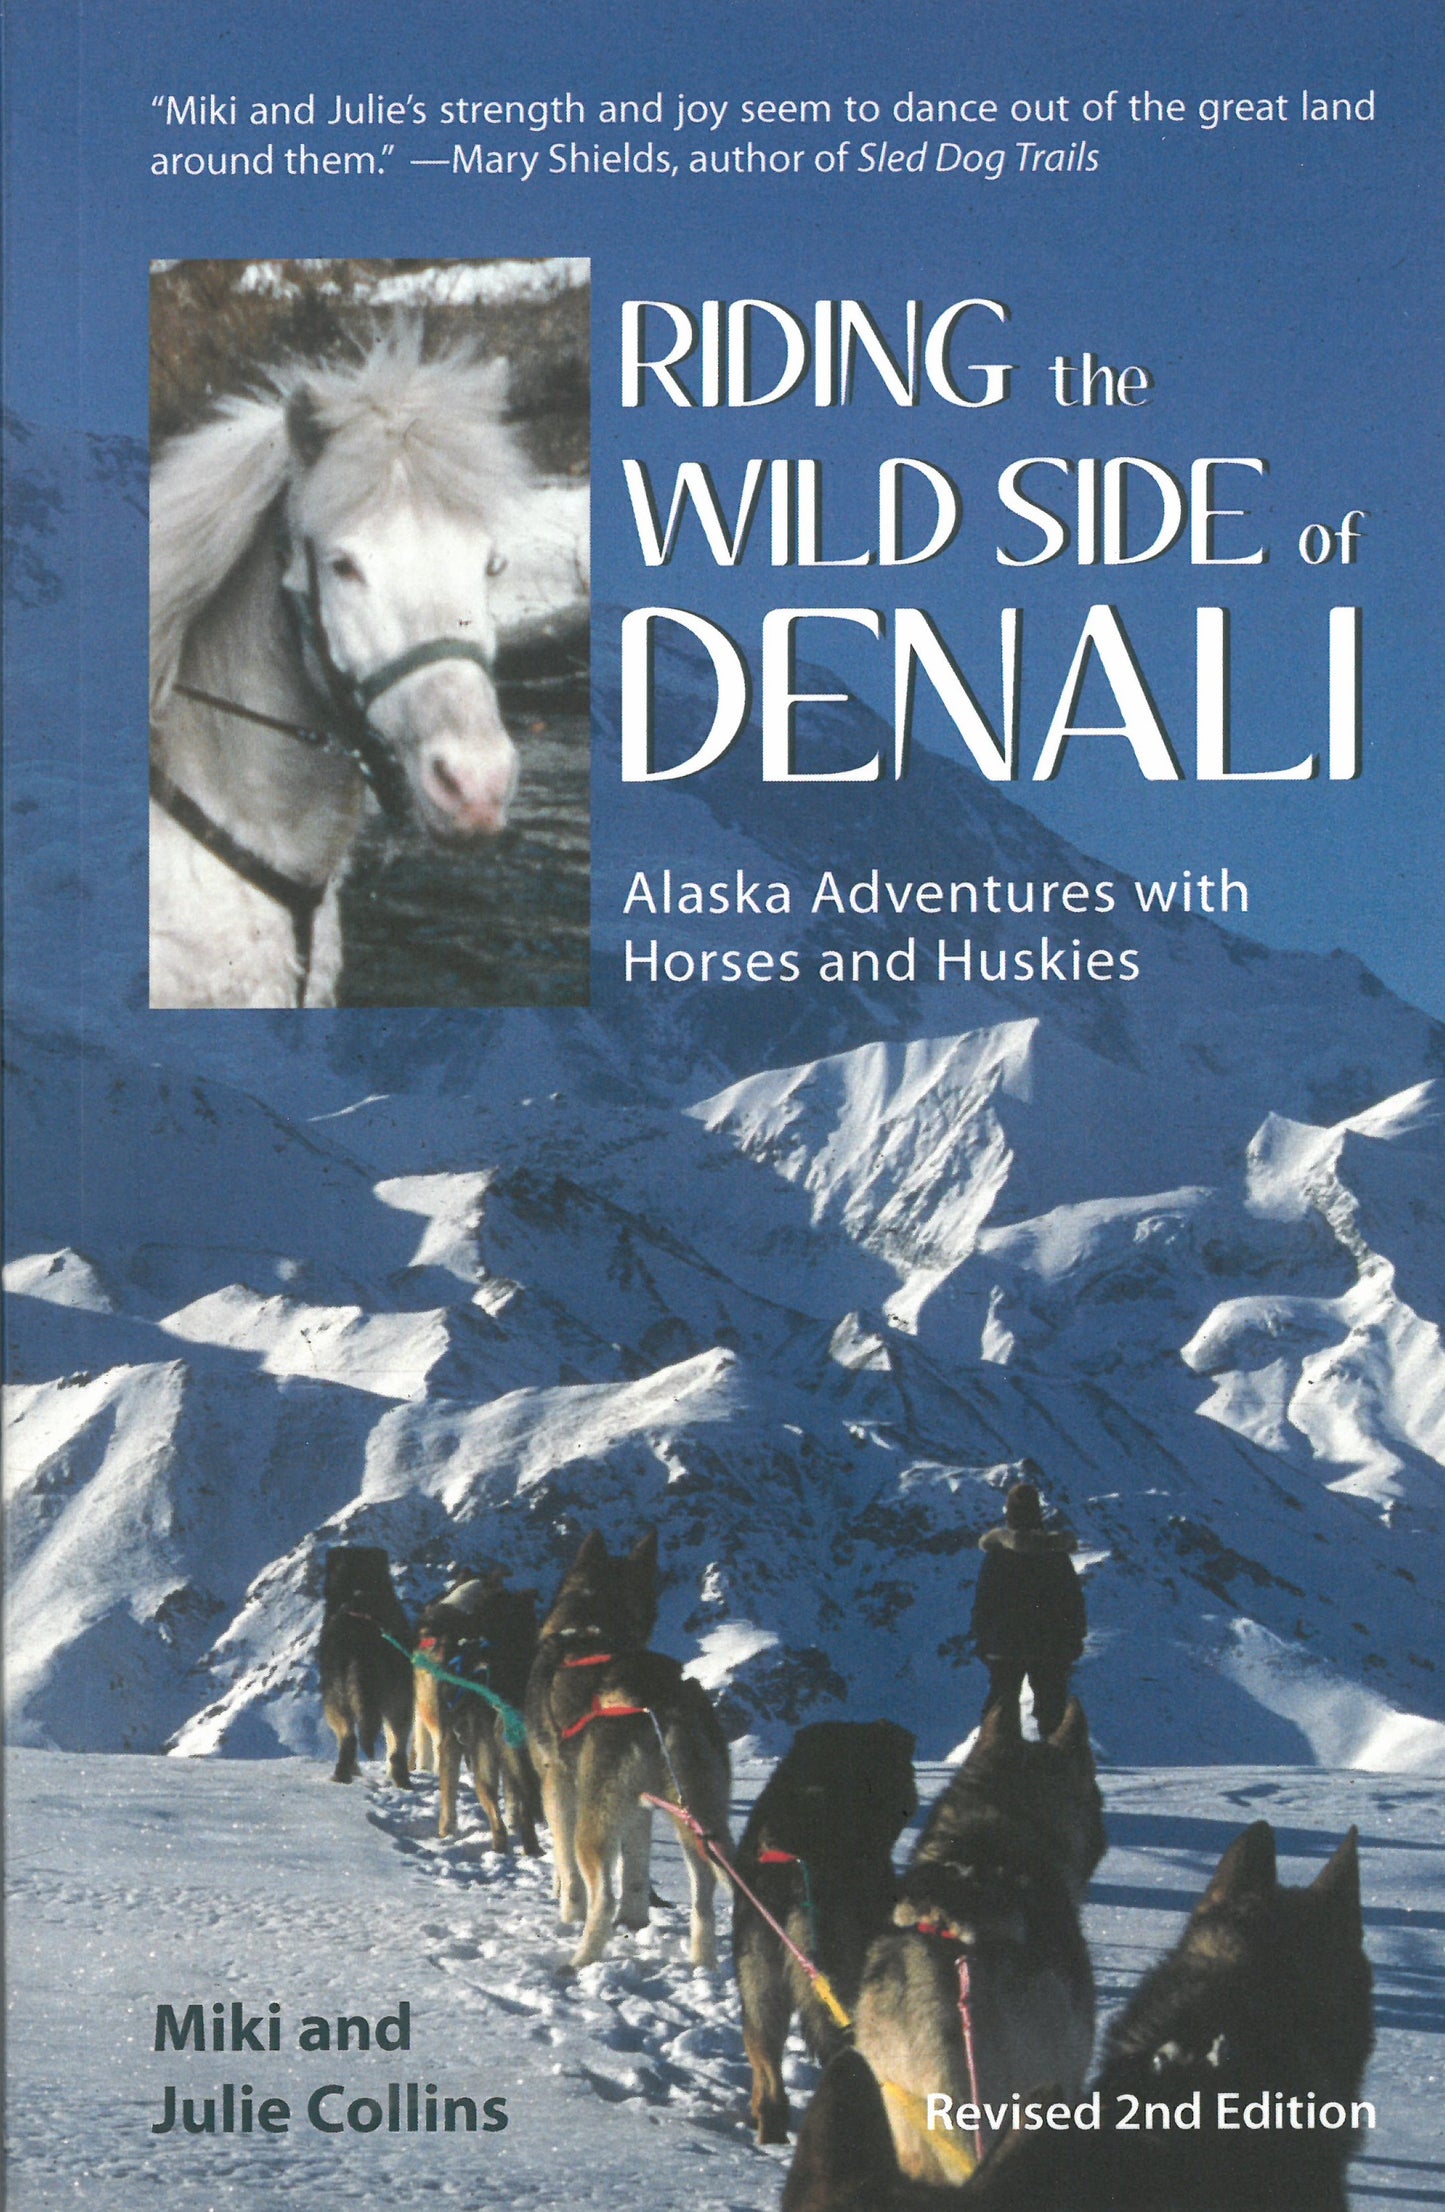 Riding the Wild Side of Denali: Alaska Adventures with Huskies and Horses